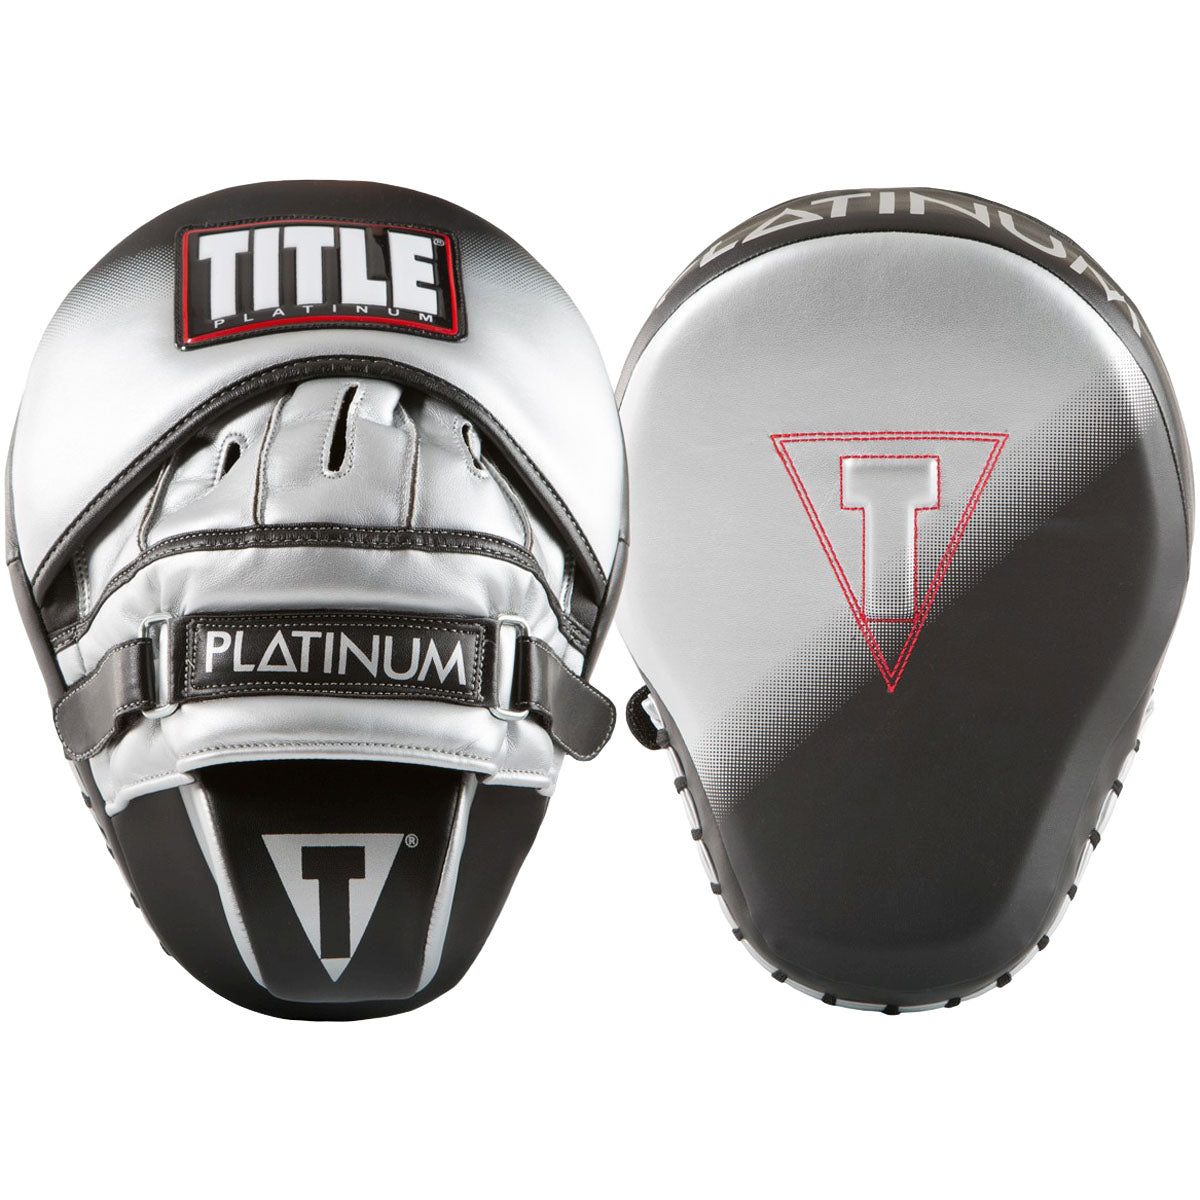 Title Boxing Platinum Proclaim Power Contoured Leather Punch Mitts -Black/Silver Title Boxing